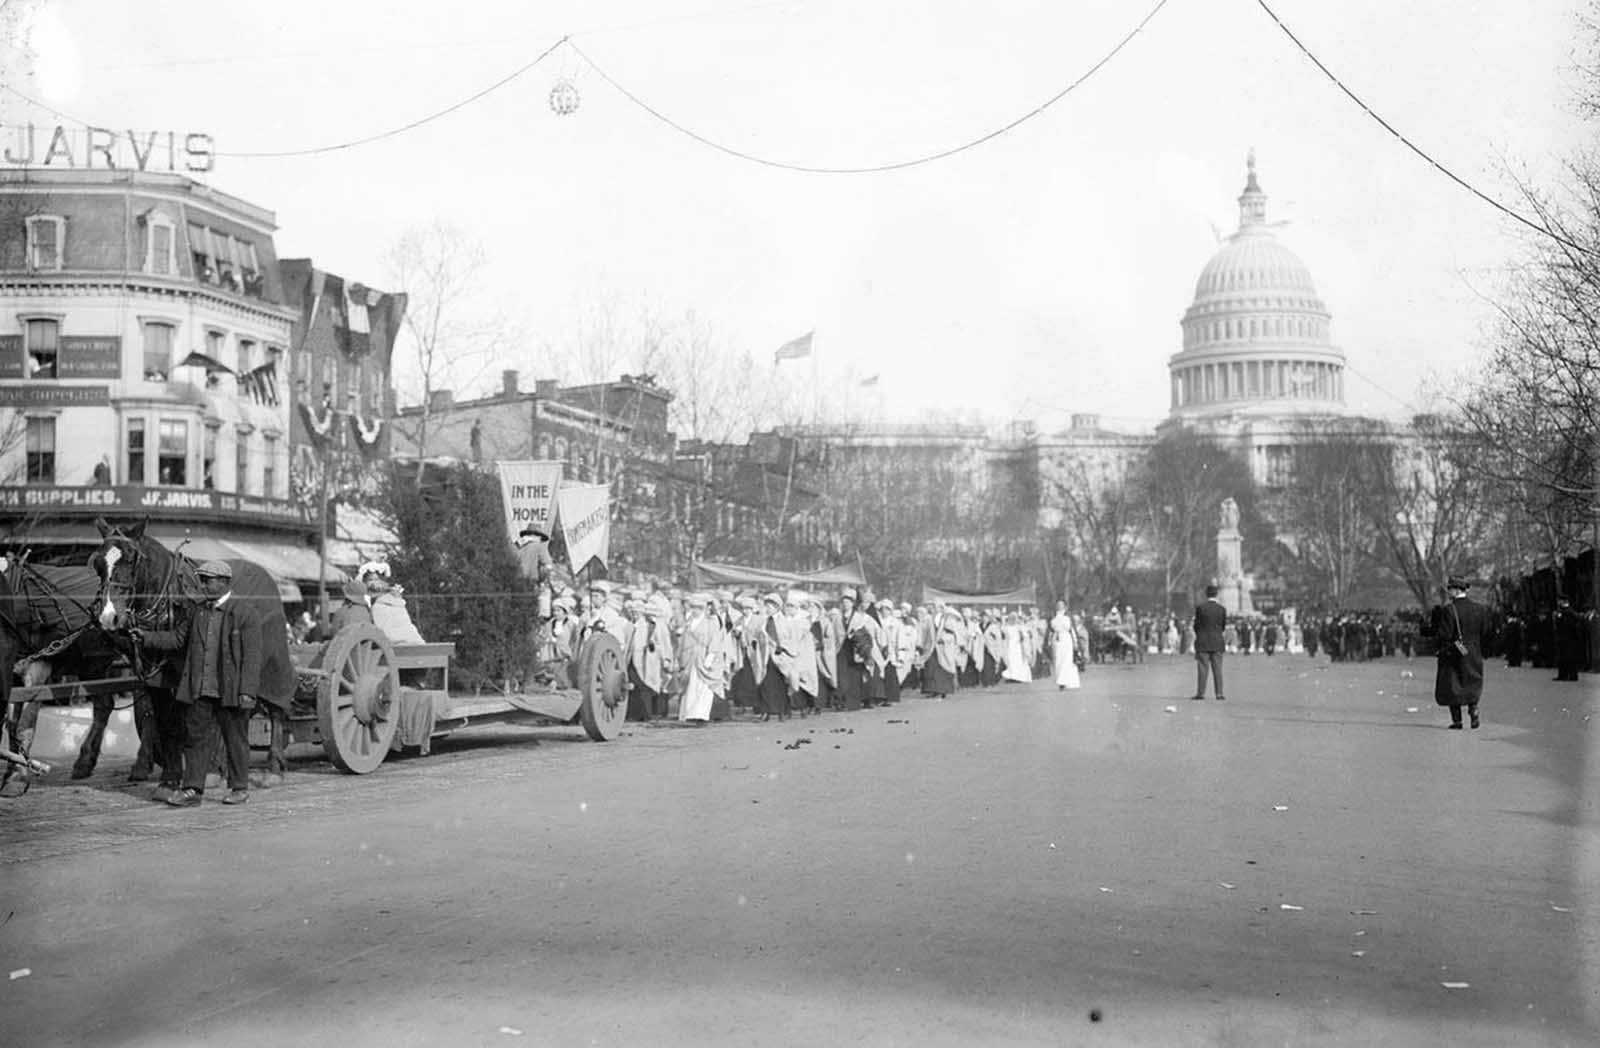 Part of the 1913 Suffrage Parade. The signs read 